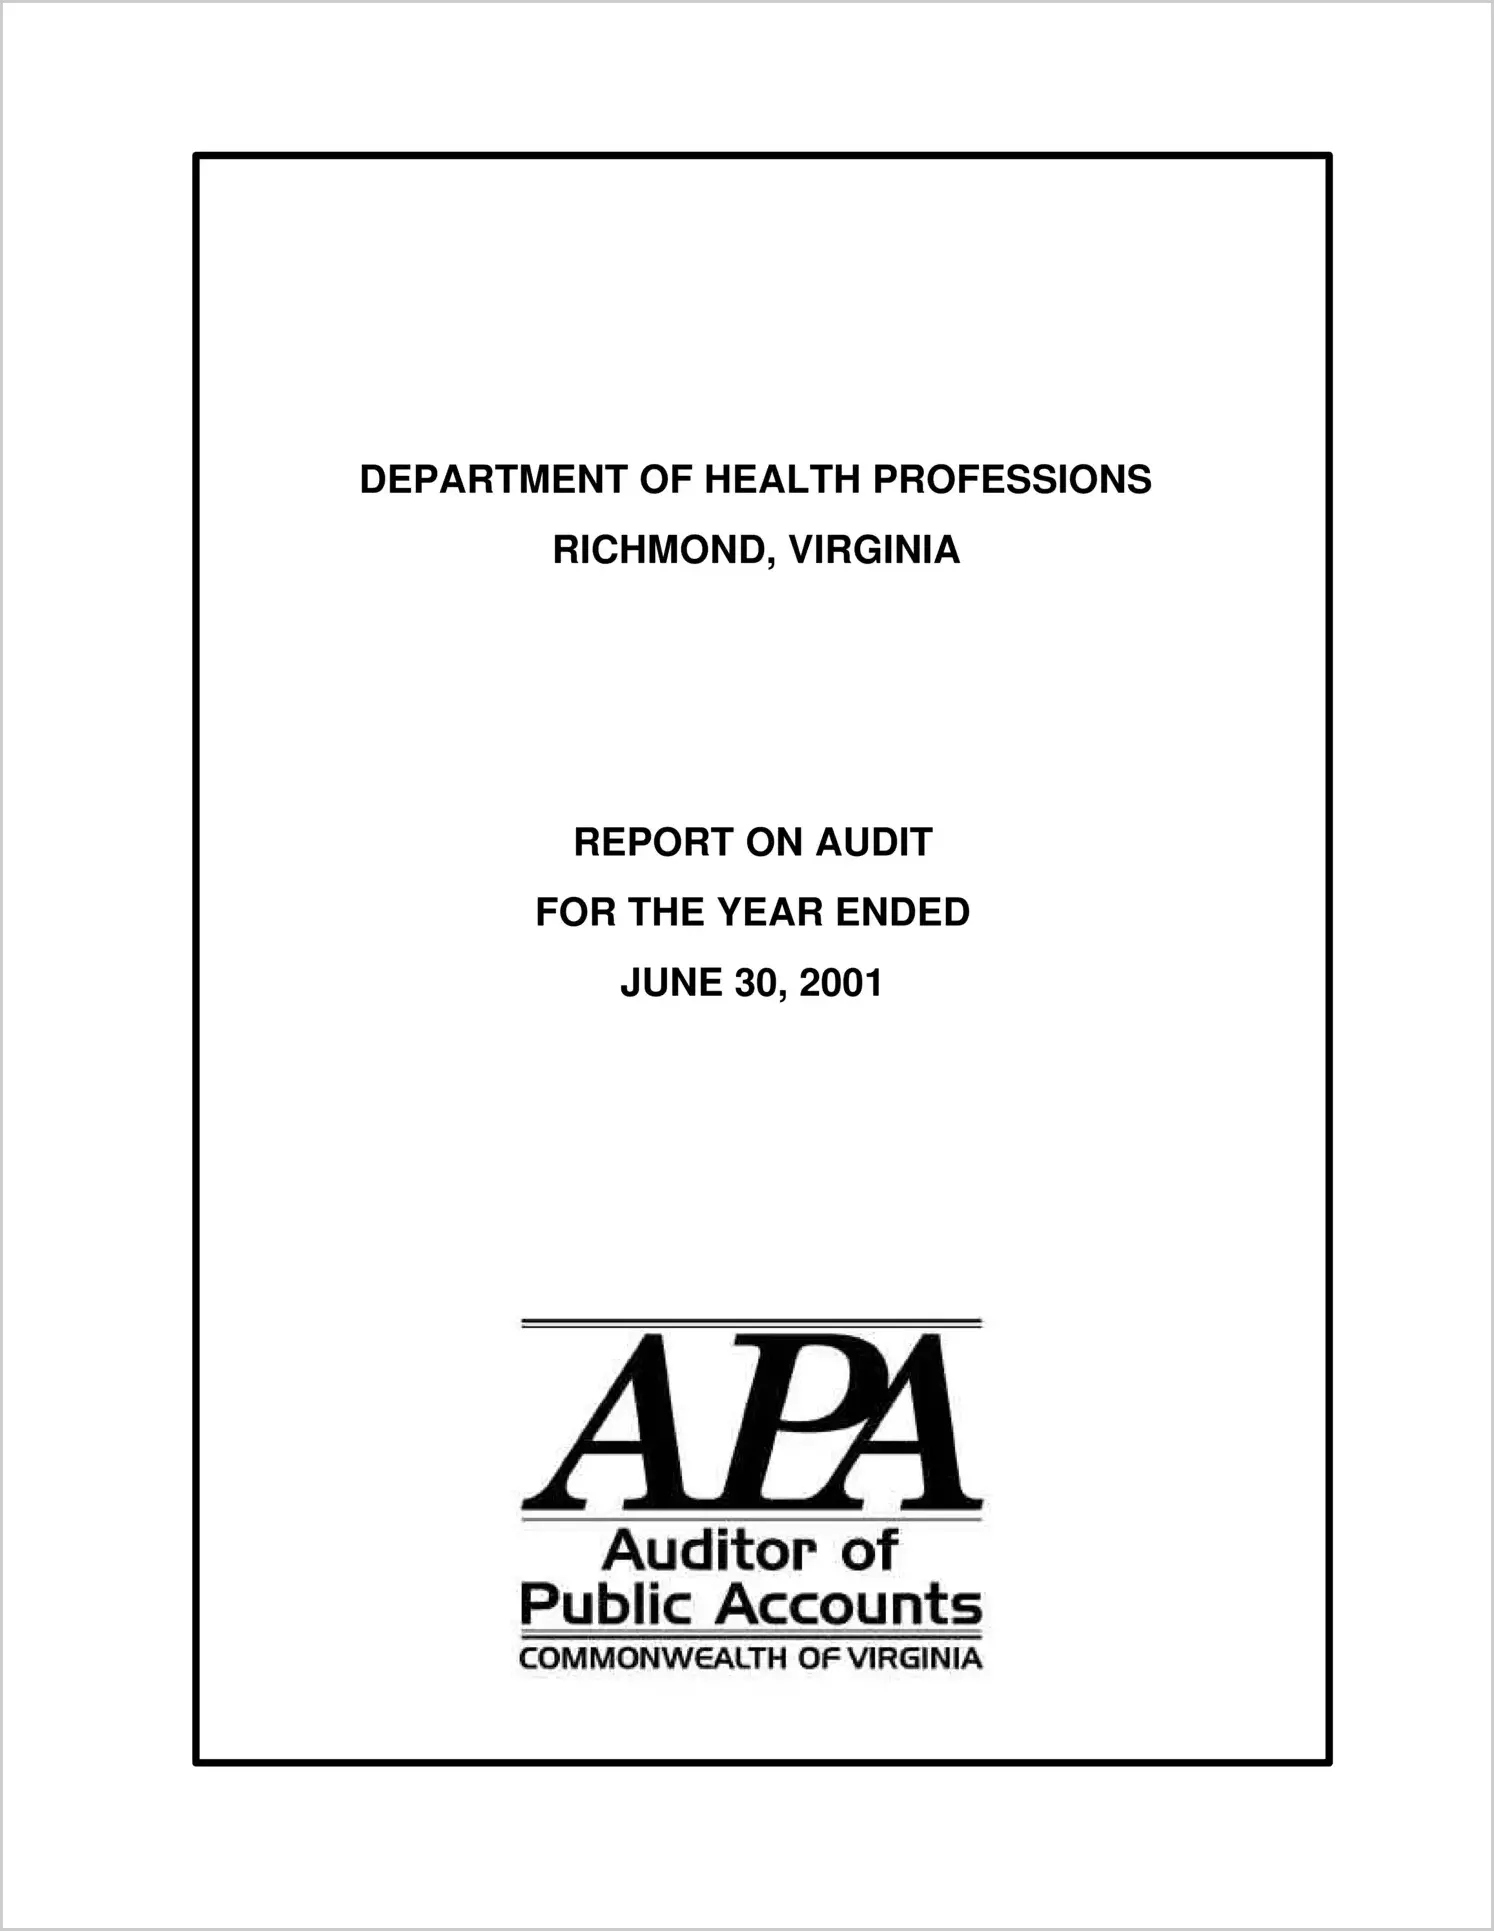 Department of Health Professions for the year ended June 30, 2001